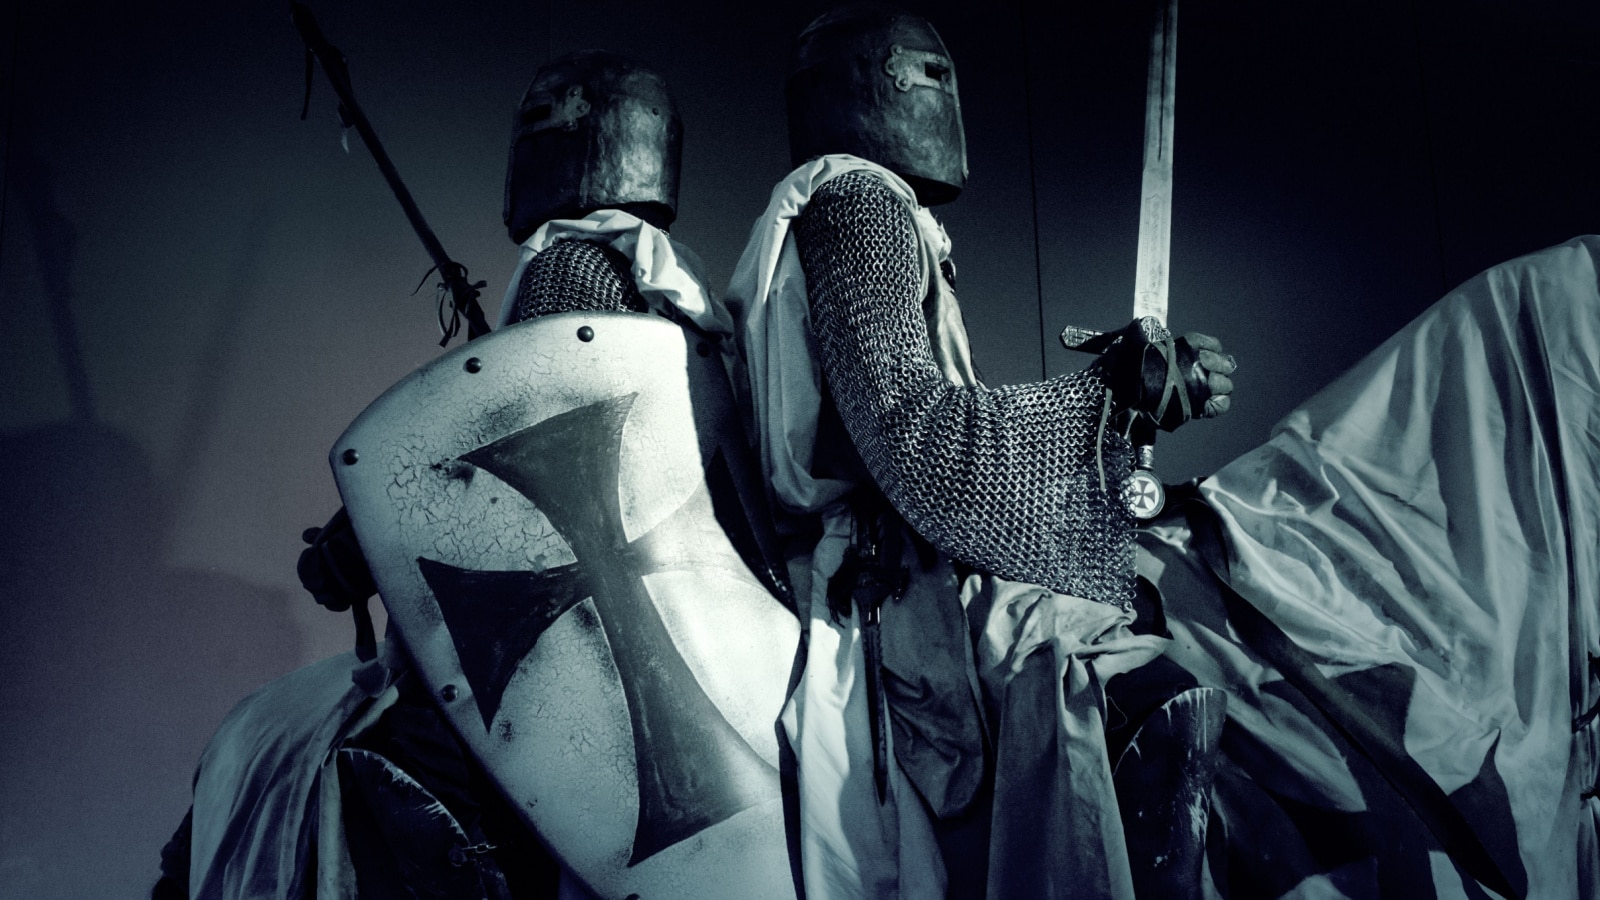 Knights Templar with armor on horse, history and war